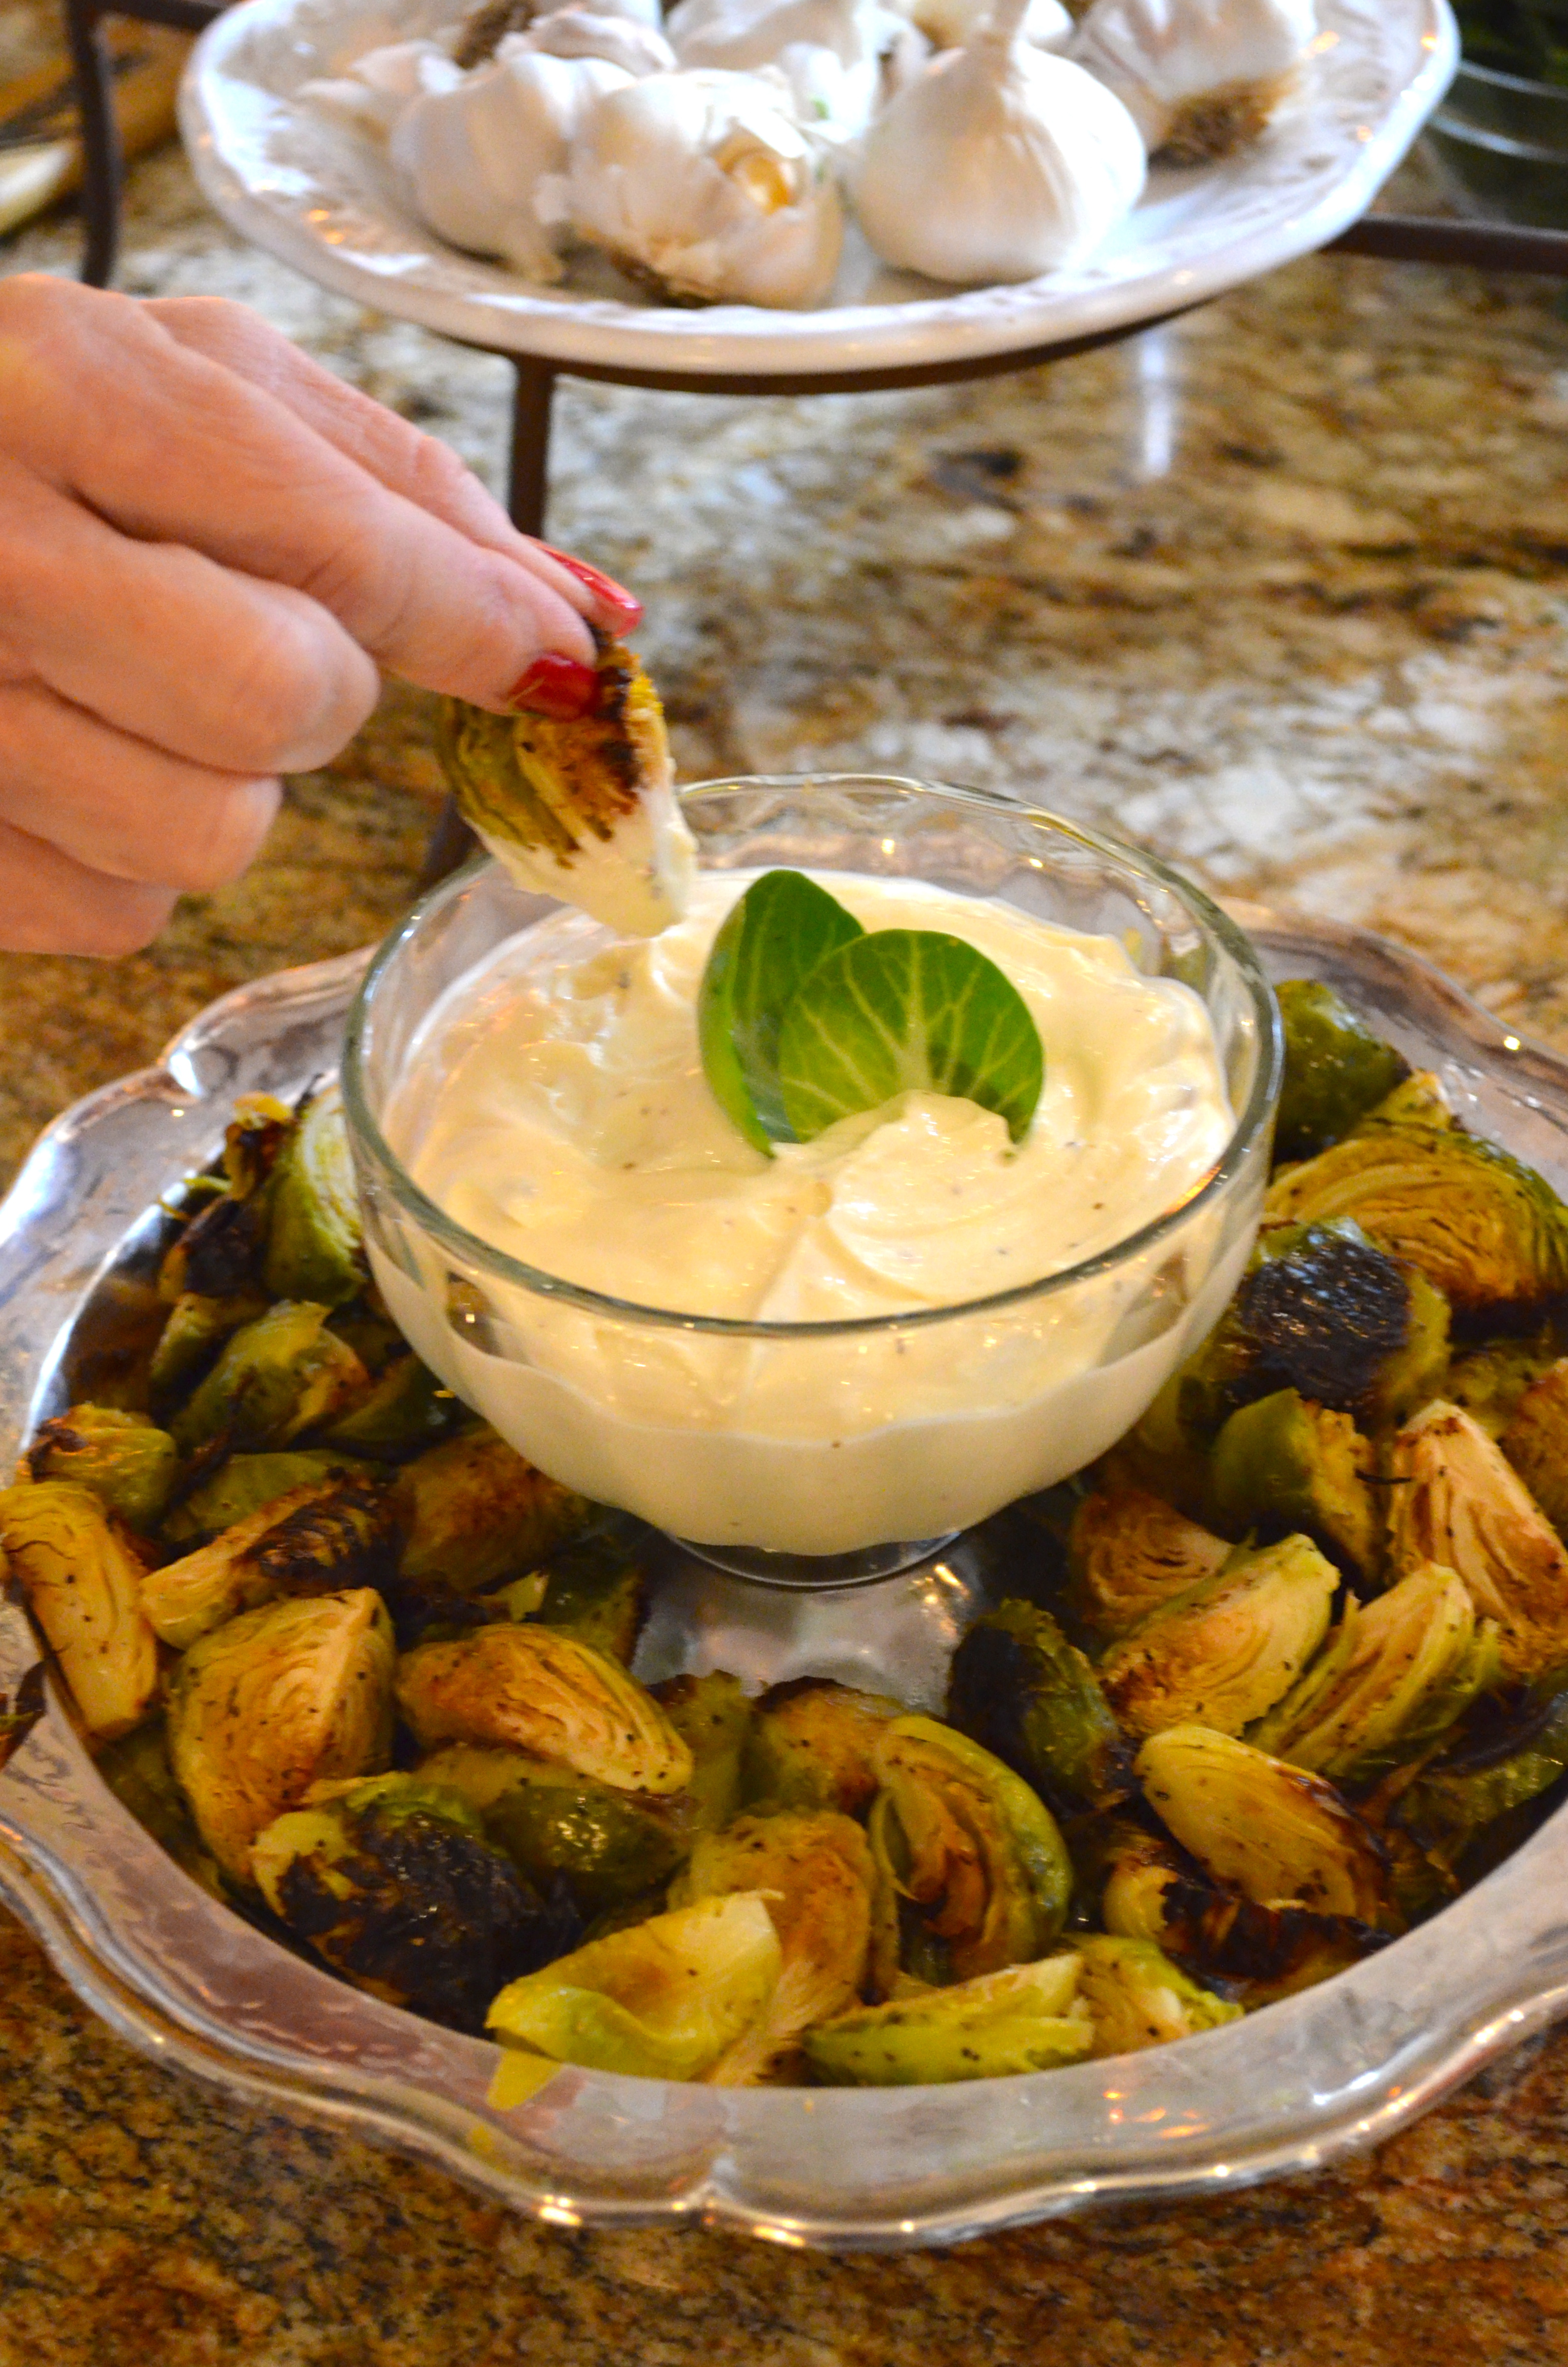 ROASTED BRUSSEL SPROUTS WITH LEMON GARLIC ALLIOLI